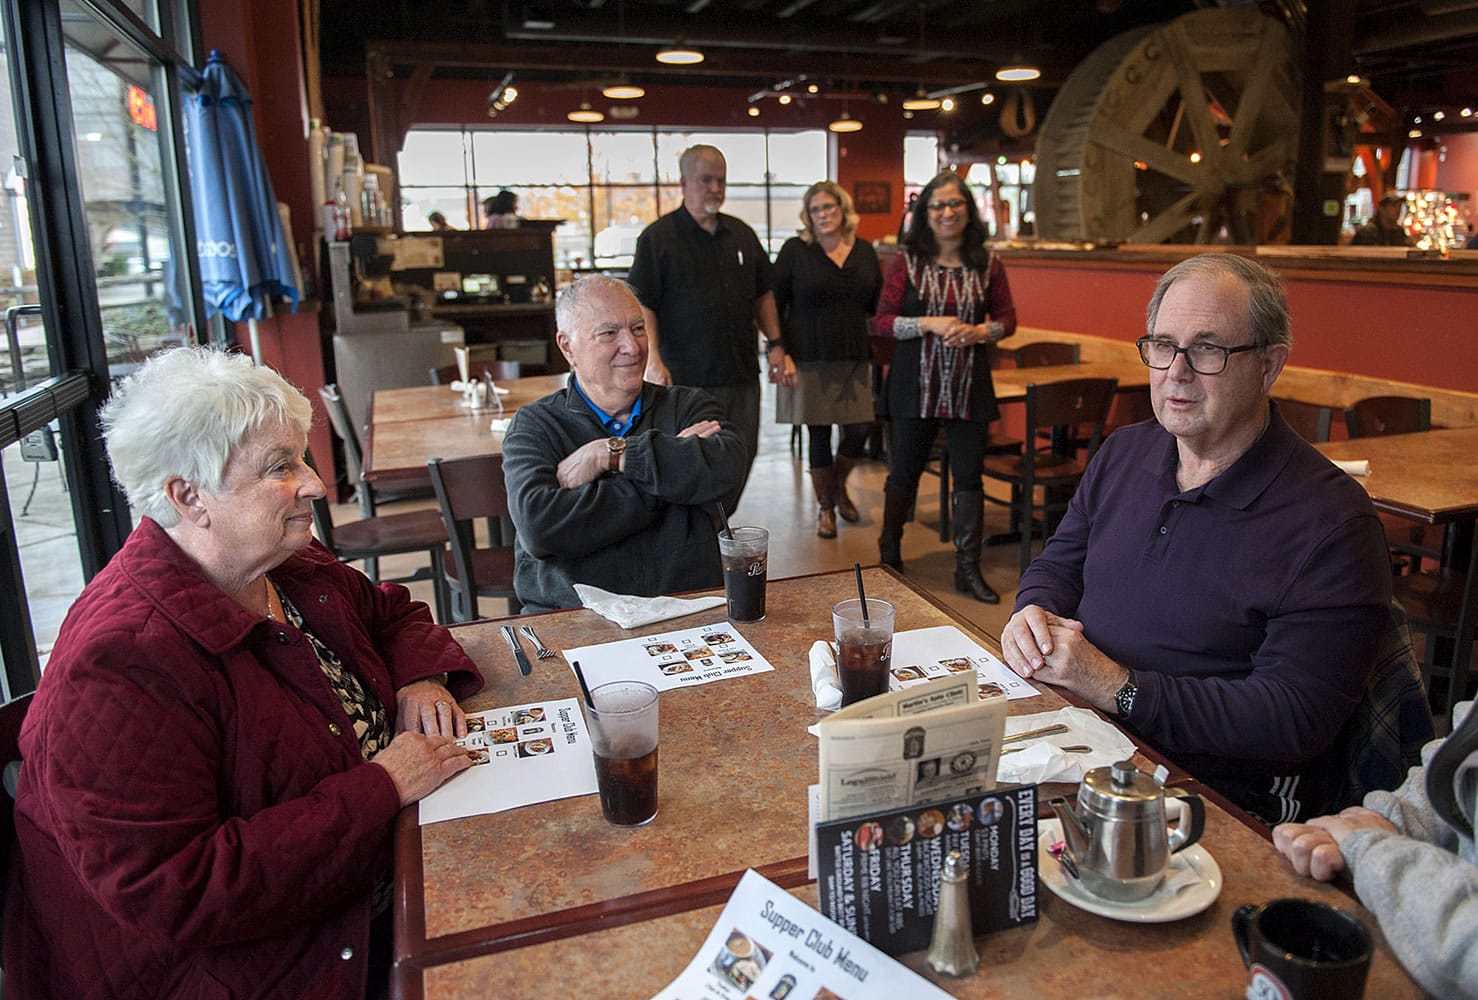 Mary Senescu, left, has a meal out with her husband, Larry, and new friends Gerry and Moira Quilling at the Mill Creek Pub. Gerry remains a great talker except when he has to fish for words; Larry is almost completely nonverbal but keeps flashing that wise smile. Behind the diners are Mill Creek Pub owner Russell Brent, Julie Williams of Home Instead Senior Care and Shanti Potts, a volunteer with the Elder Justice Center.